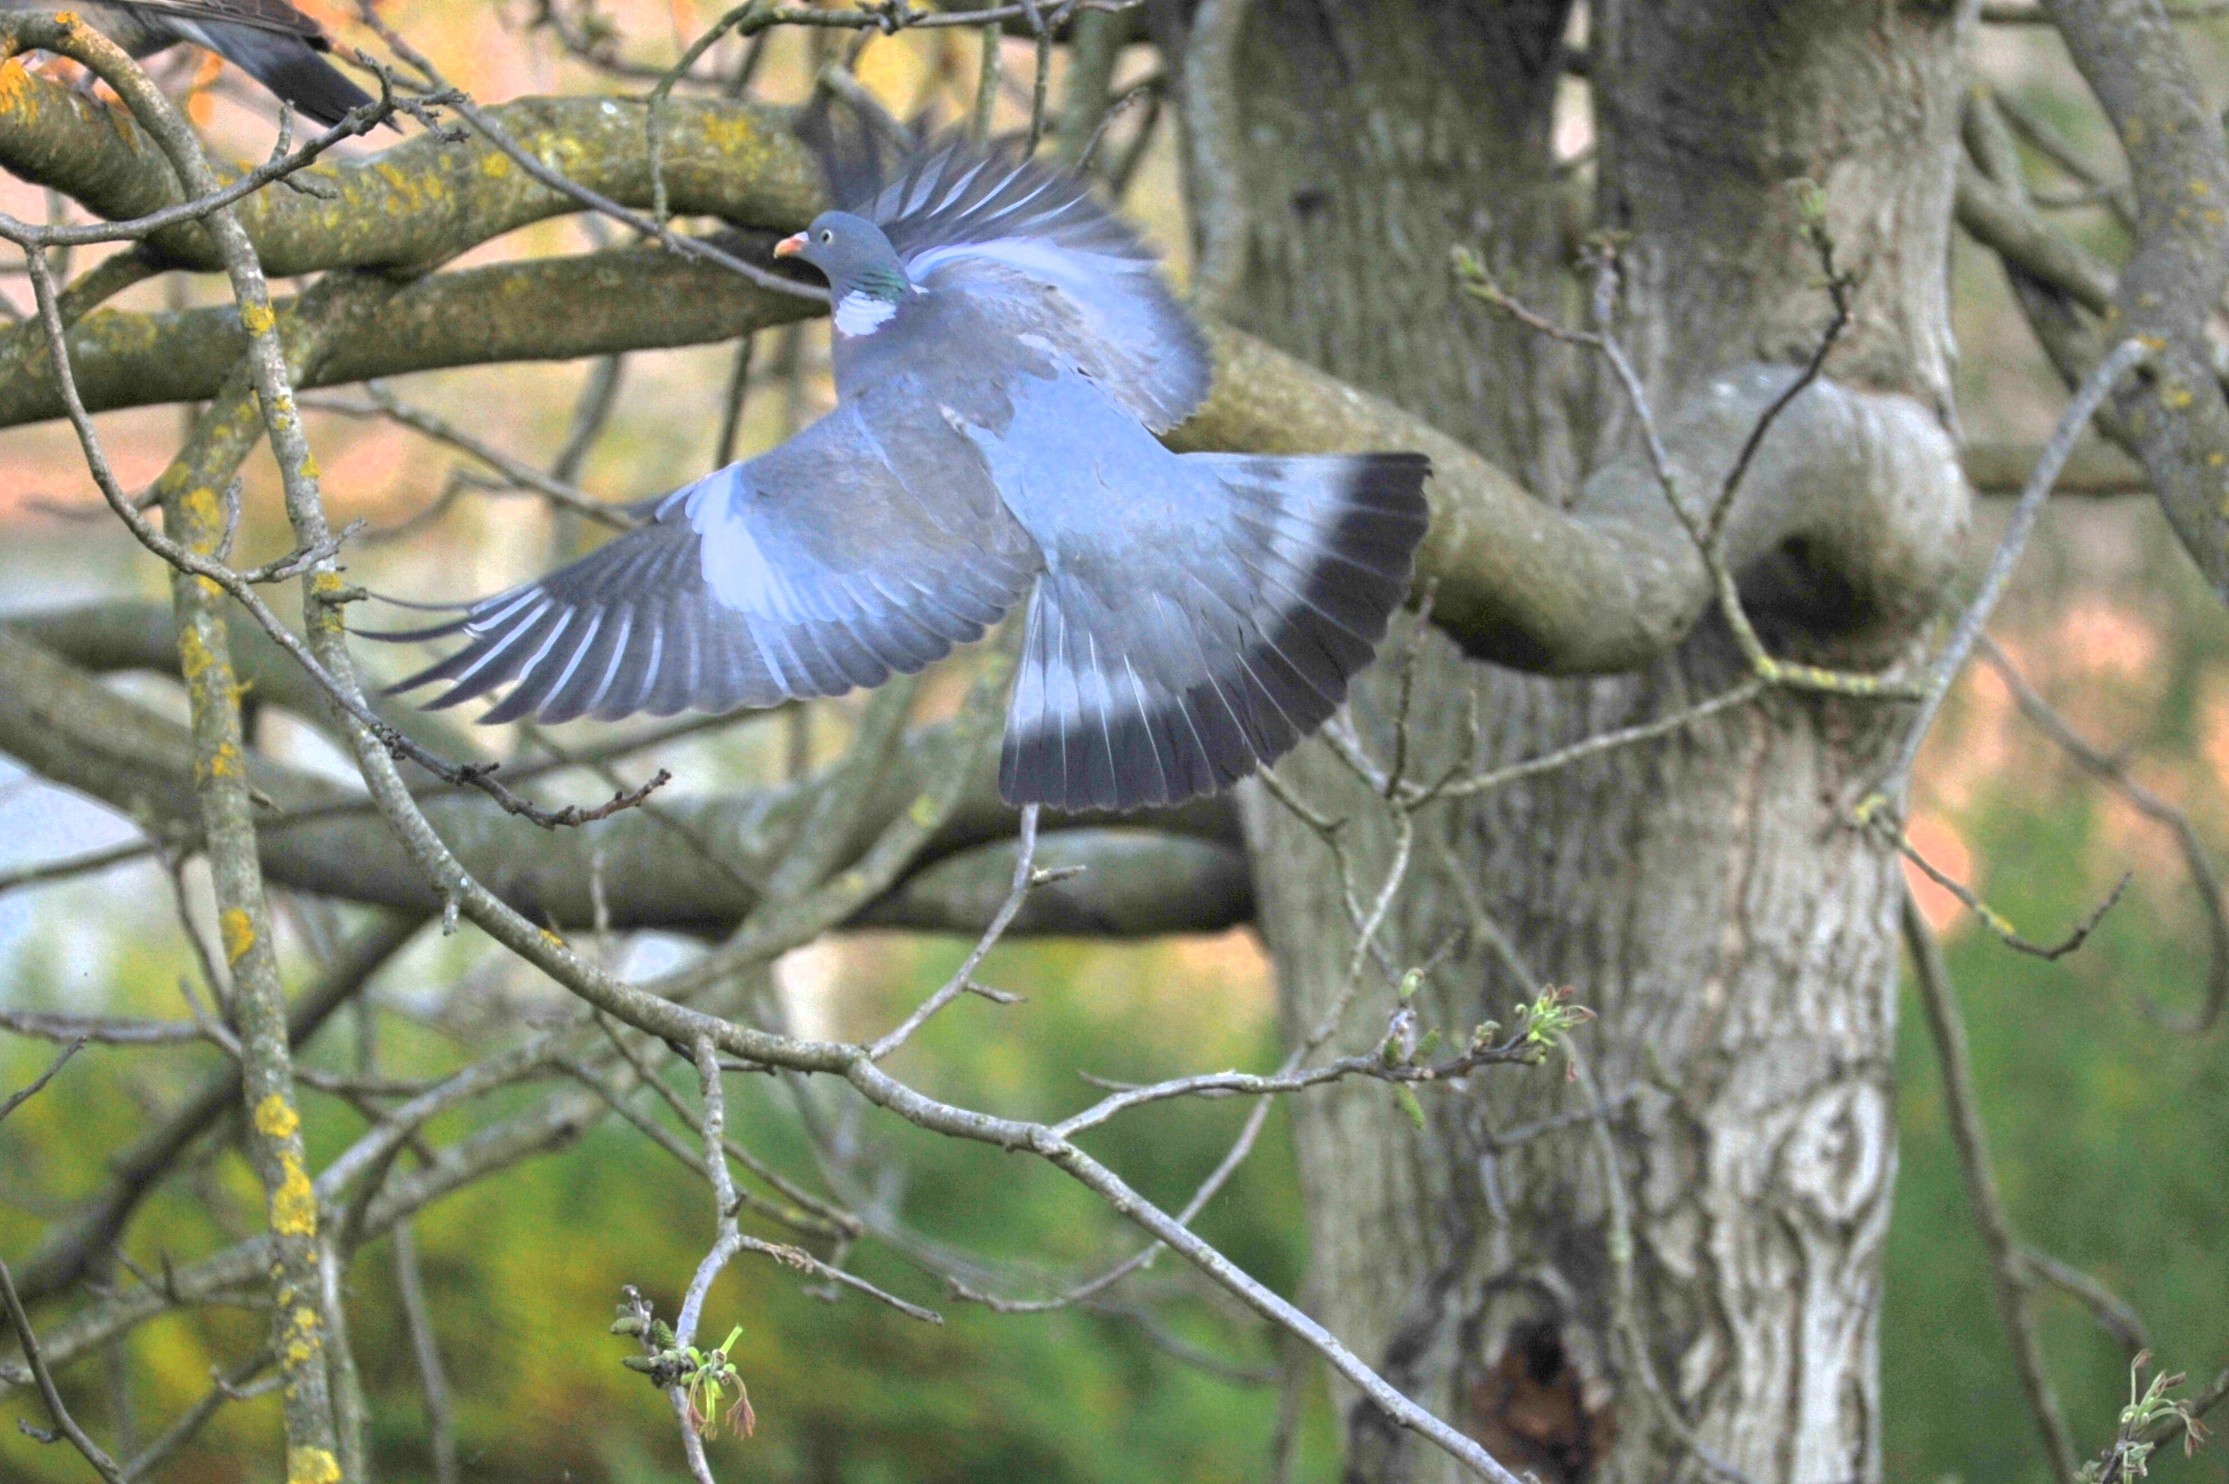 in "landing" to the branch - pigeon...